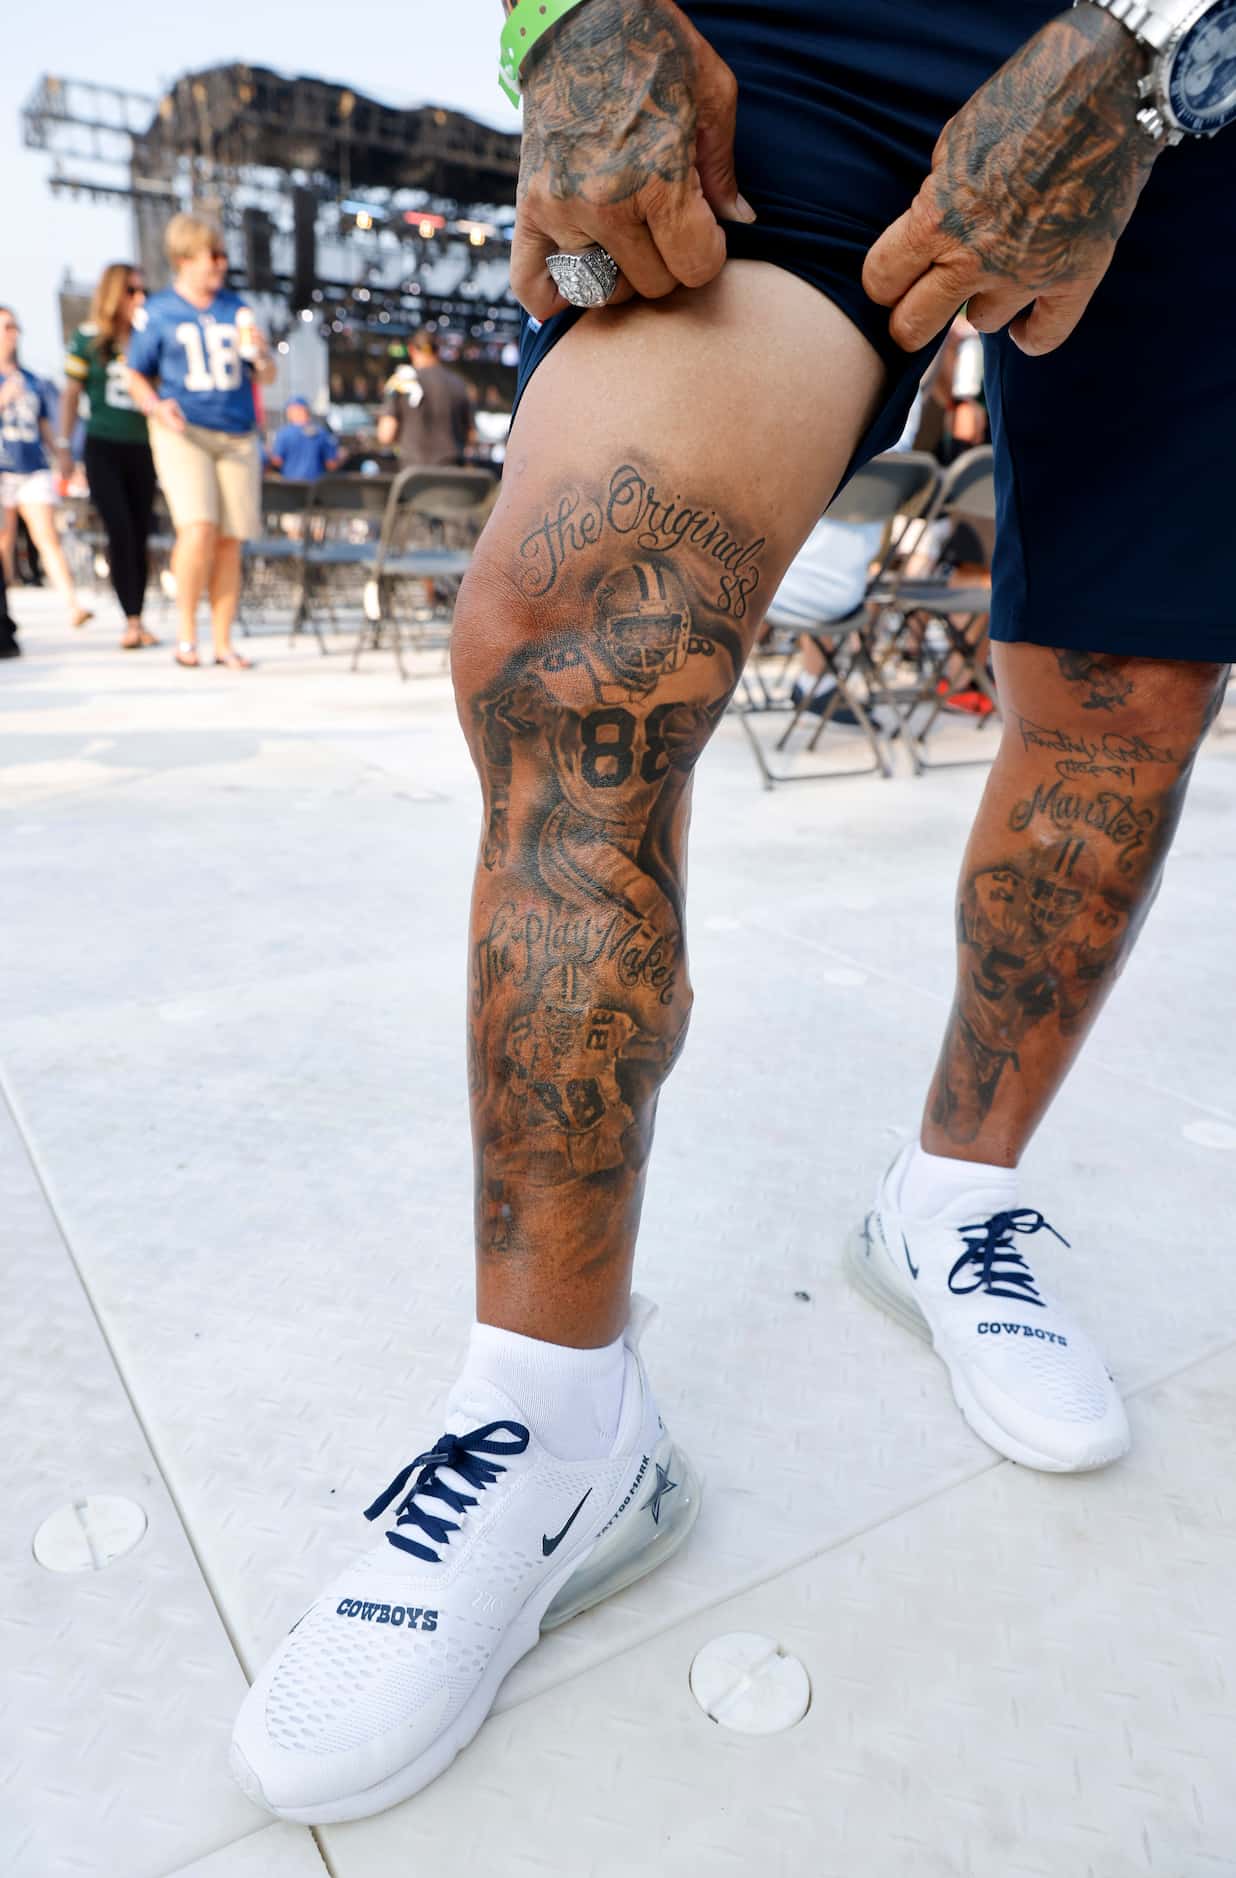 Mark Shenefild shows off his tattoo of Pro Football Hall of Fame inductee Drew Pearson of...